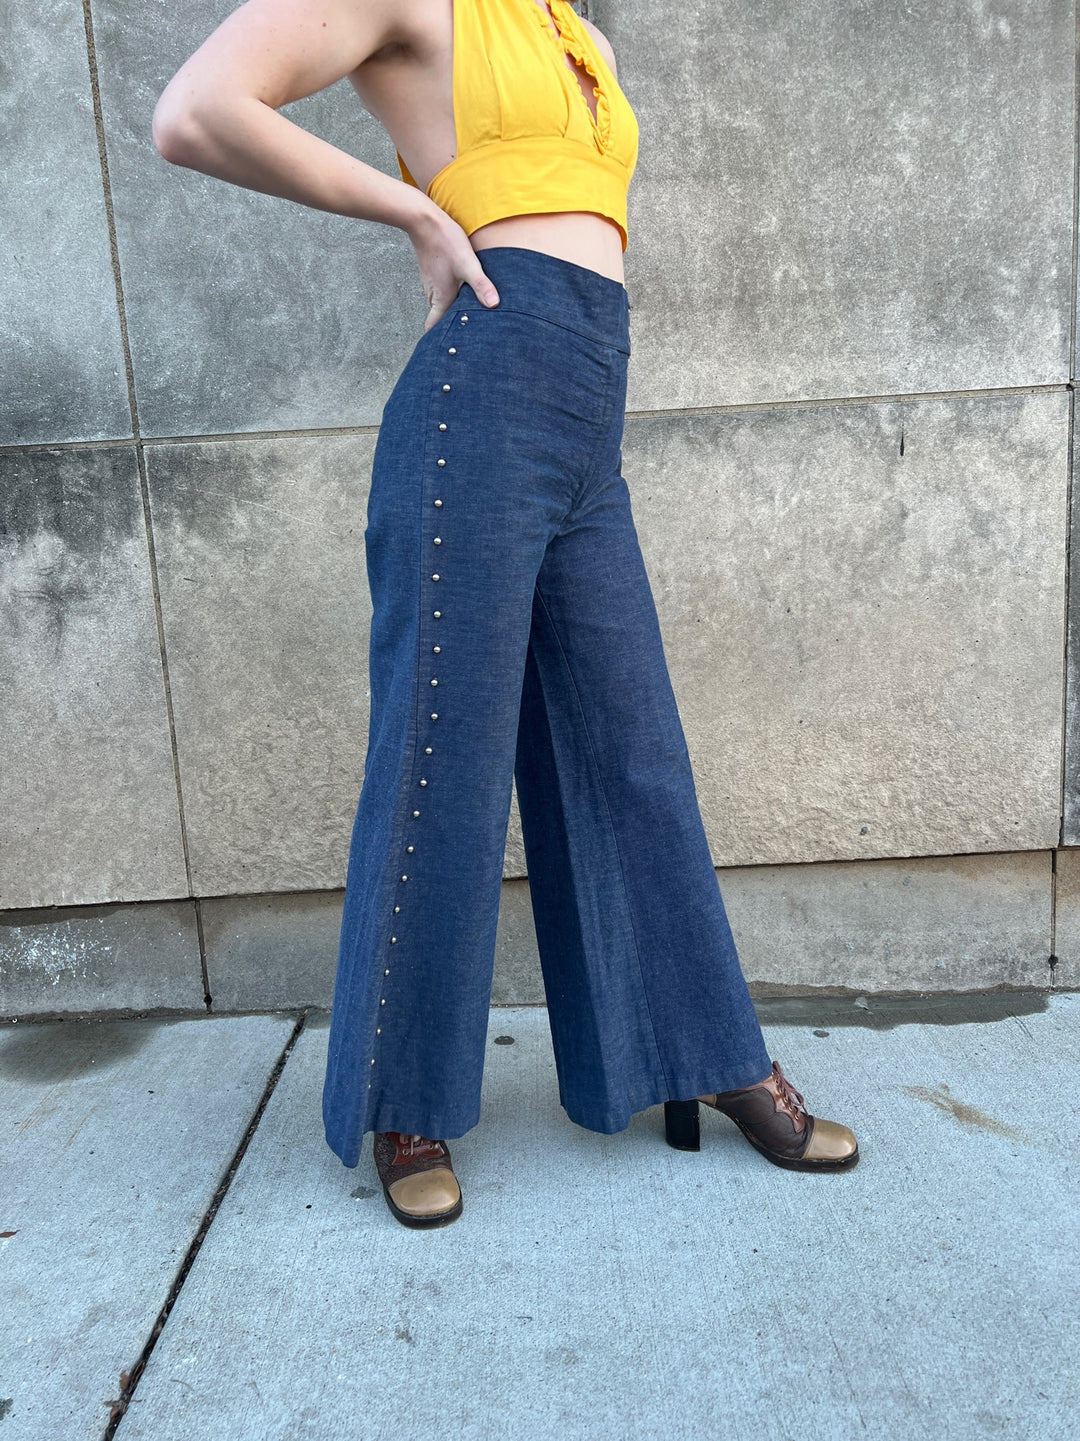 70s Bell Bottom Denim Jeans, Studs down the Sides